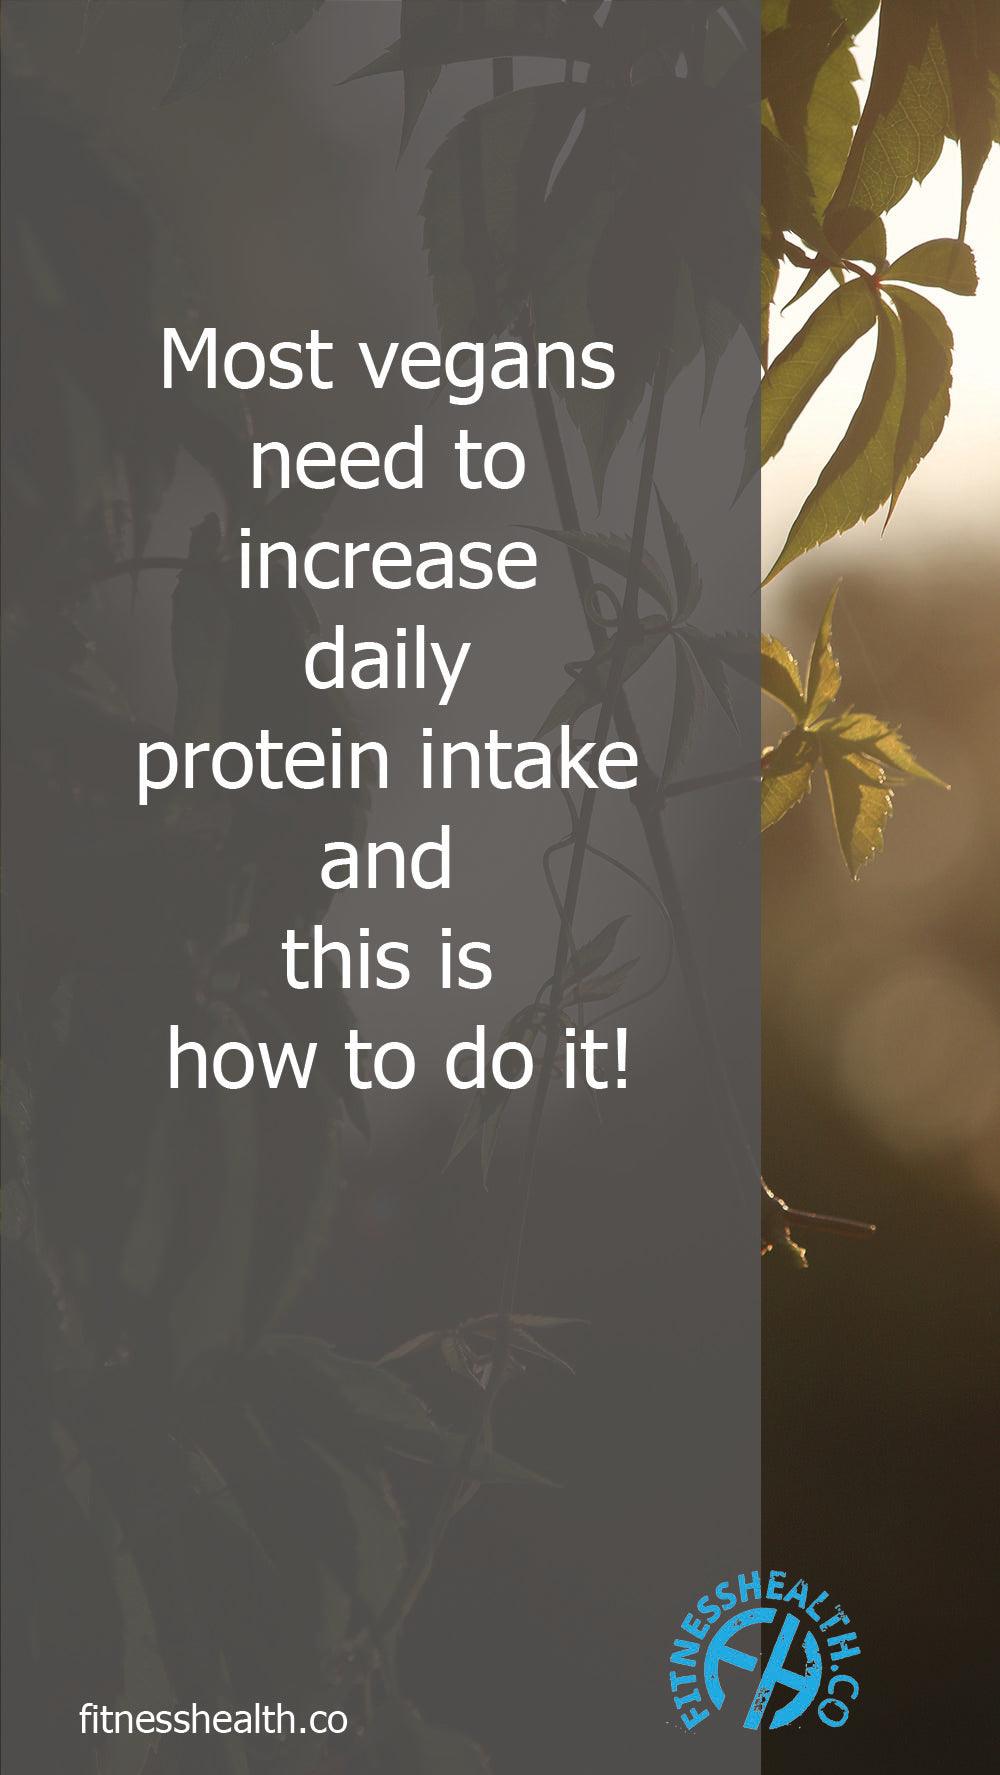 Most vegans need to increase daily protein intake and this is how to do it! - Fitness Health 